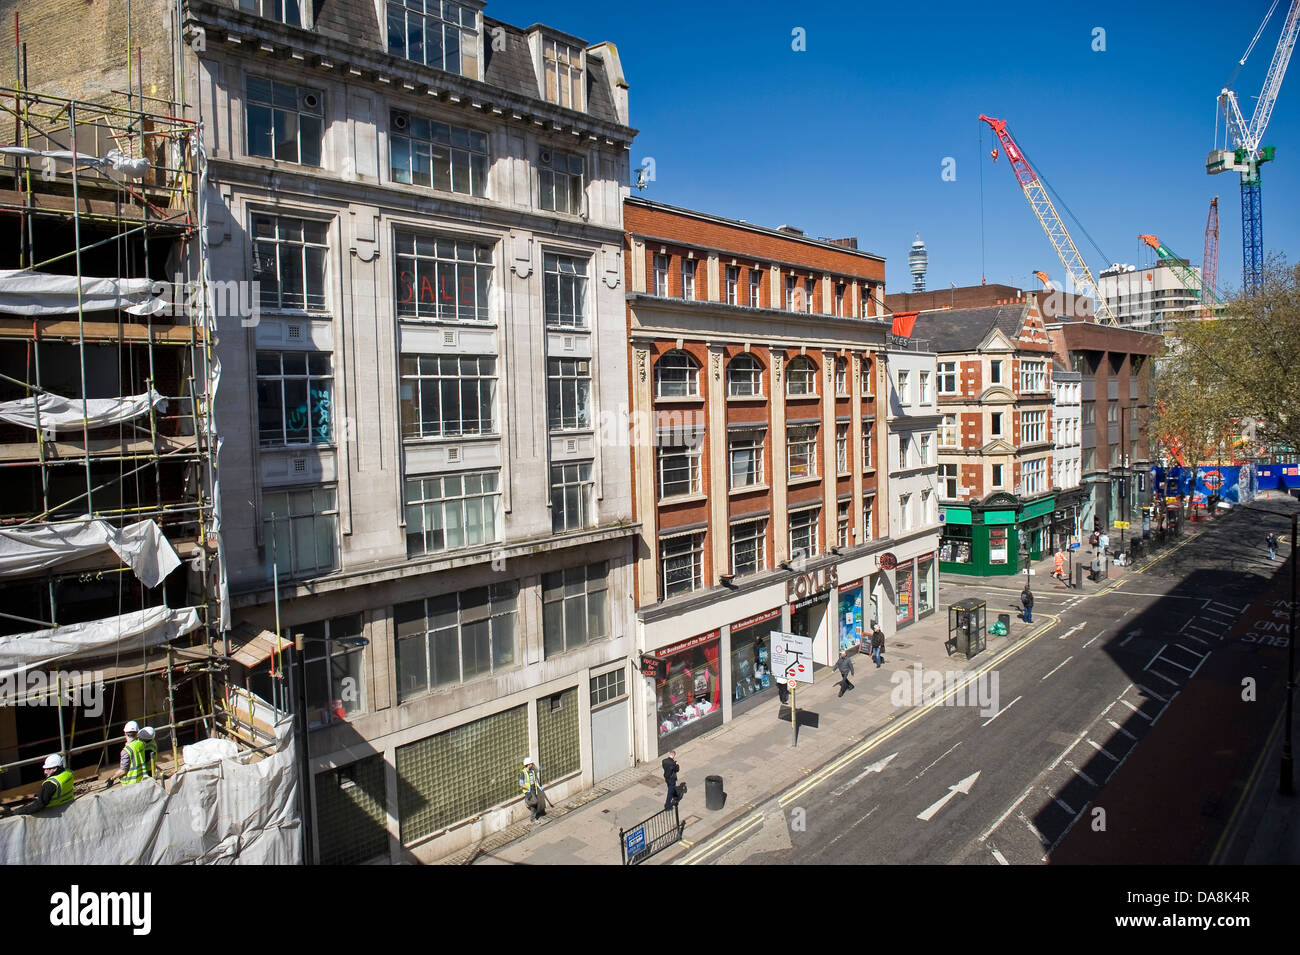 Foyles Bookshop in Charing Cross Road, Central London, UK Stock Photo